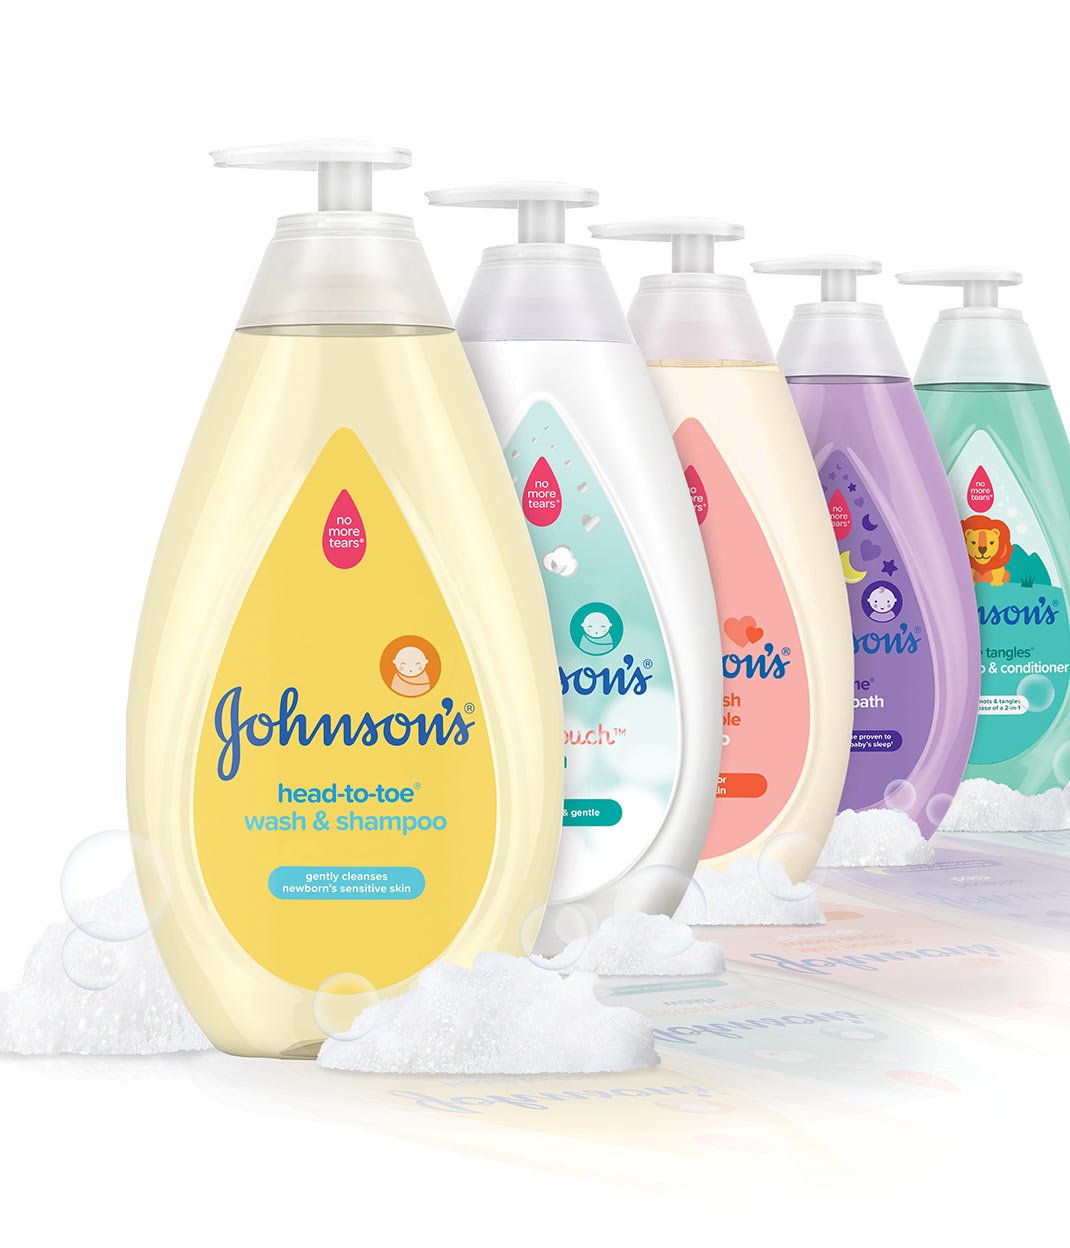 Johnson’s baby product samples line image